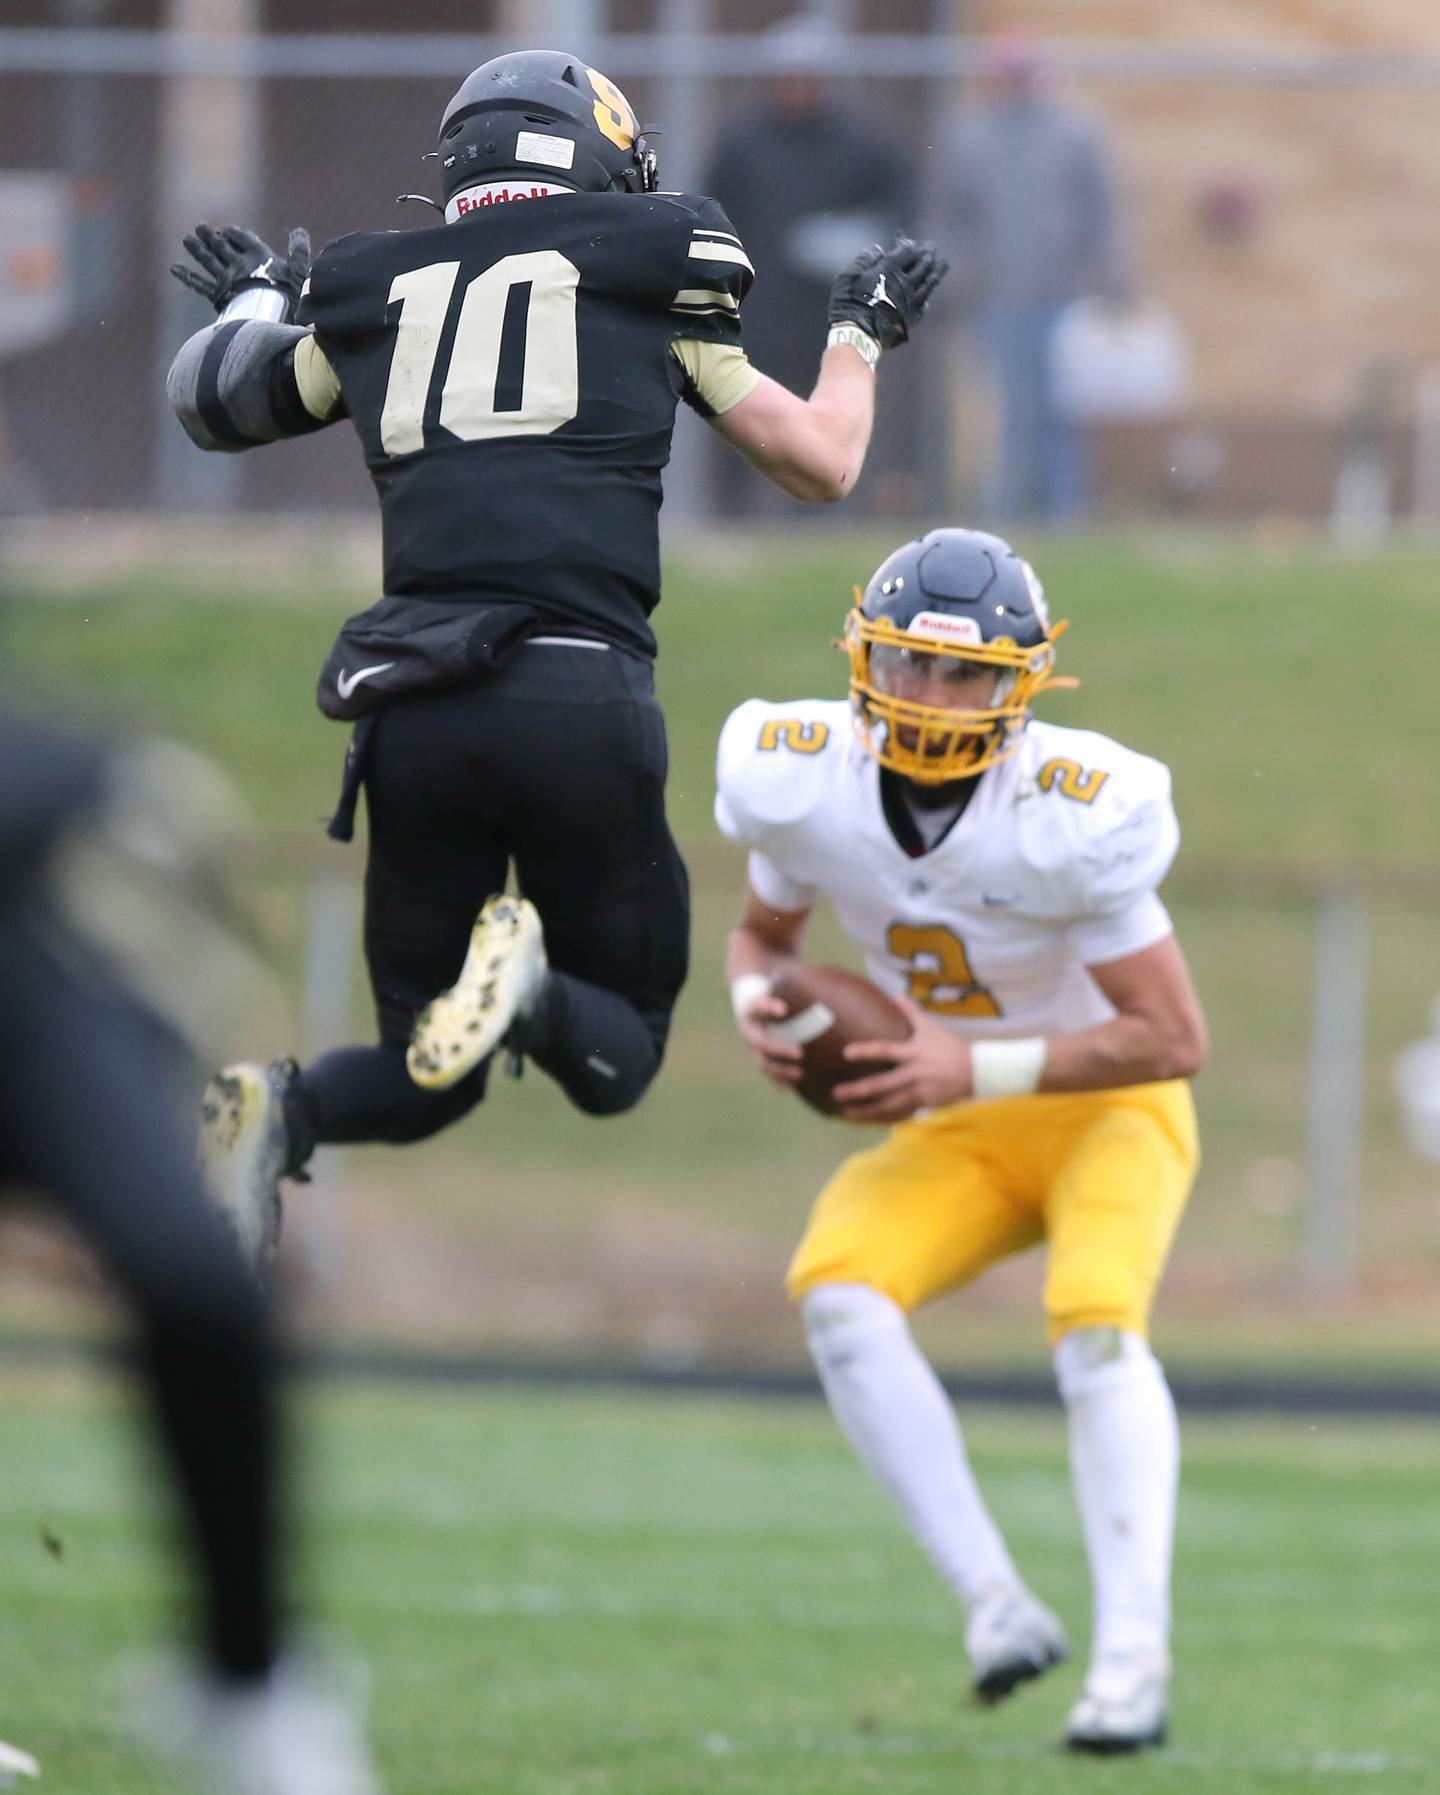 Sycamore's Zack Crawford leaps at Sterling's JP Schilling during their Class 5A state playoff game Saturday, Nov. 12, 2022, at Sycamore High School.